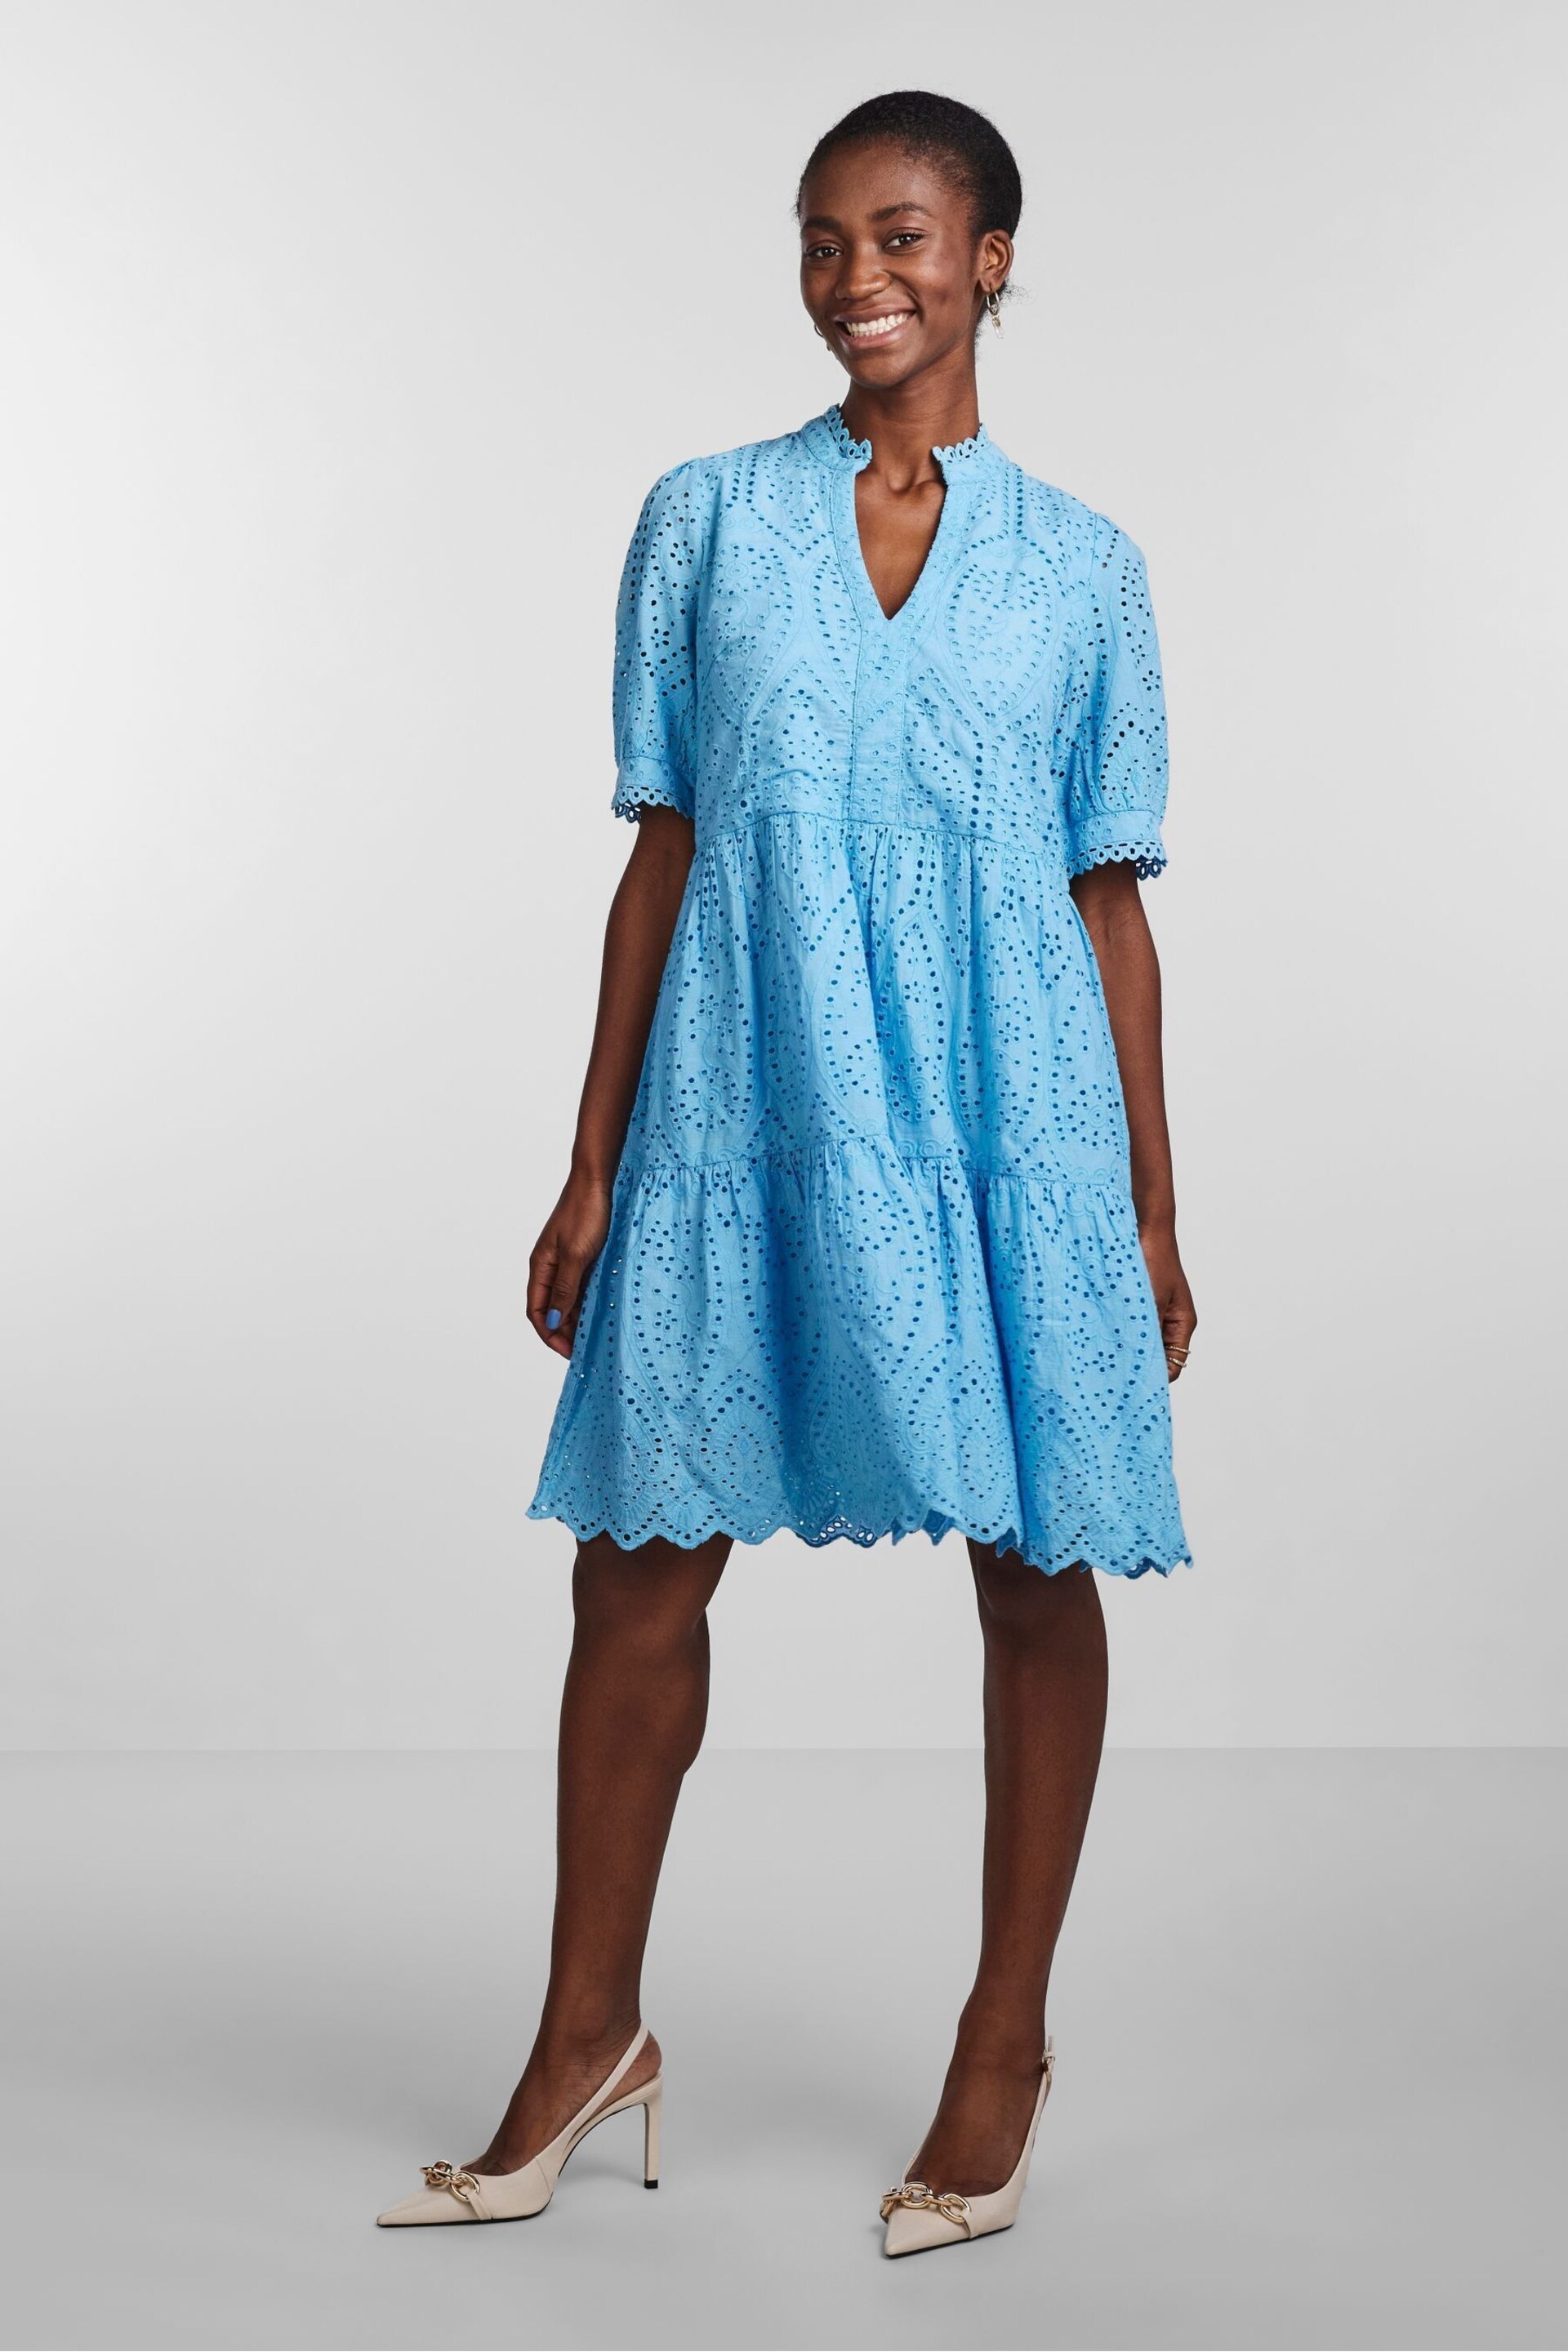 Y.A.S Blue Short Sleeve Broiderie Tiered Dress - Image 2 of 5